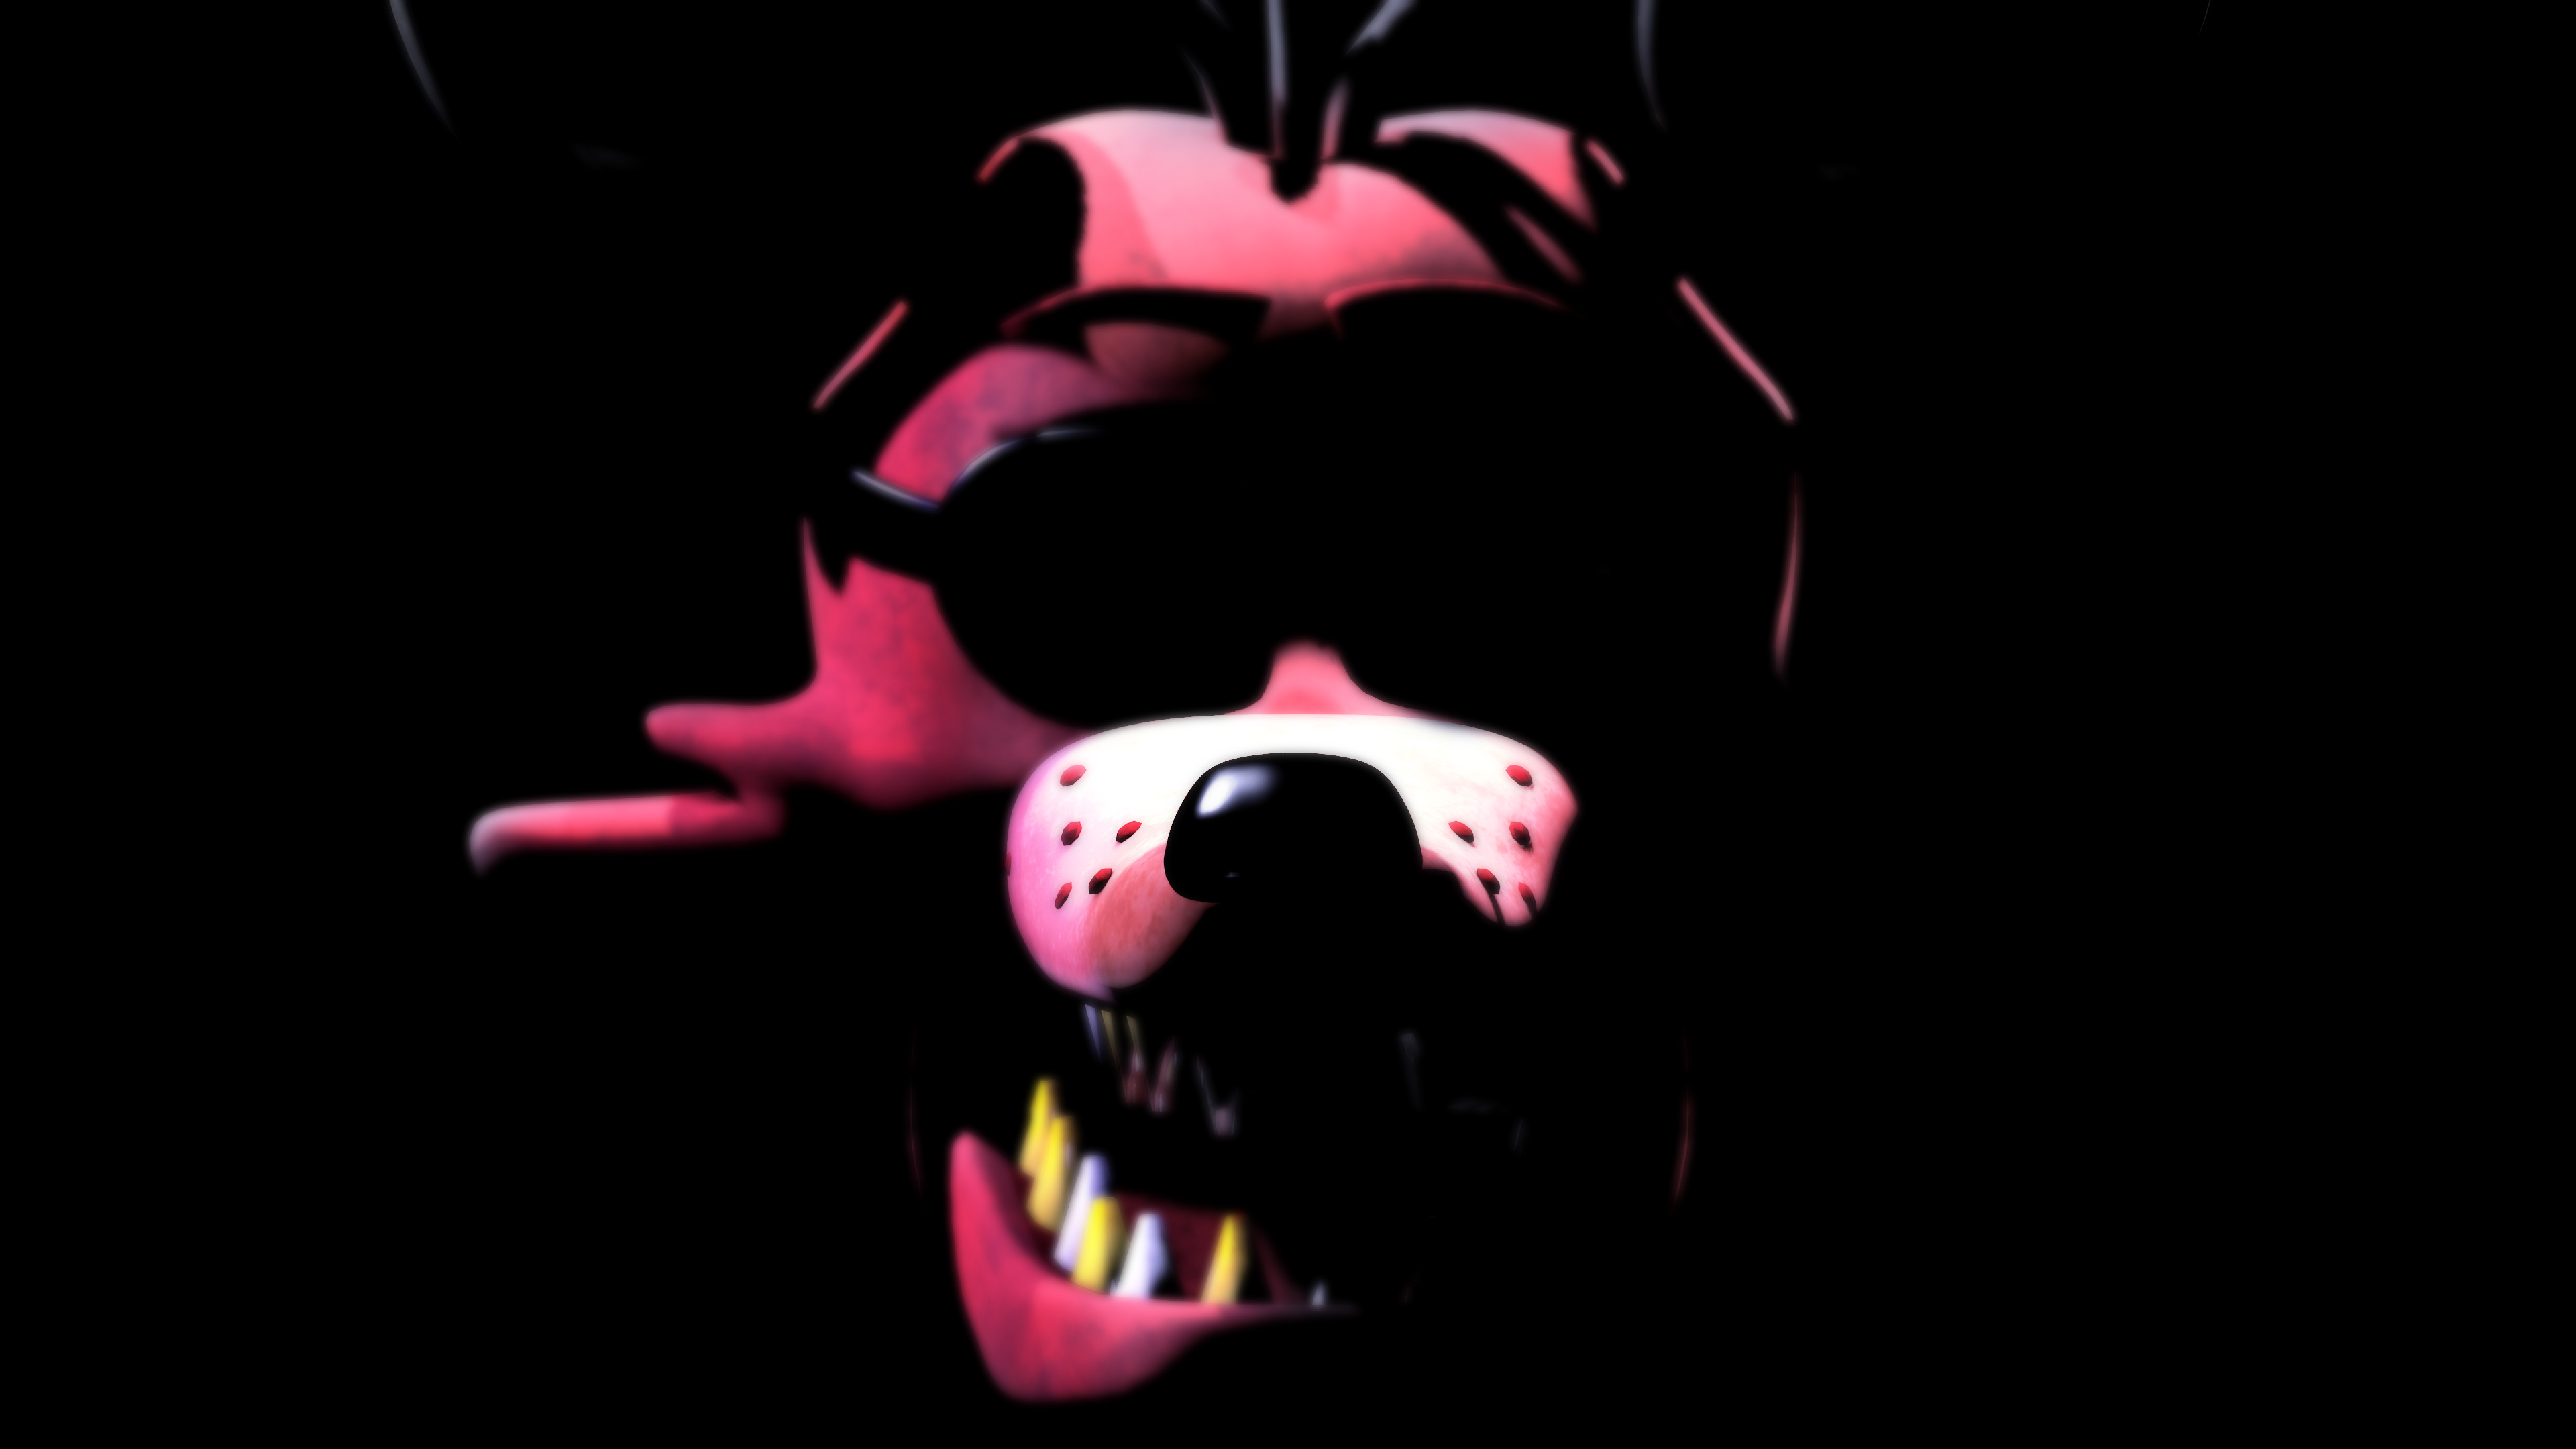 … Five Nights at Freddy's | Poster/Wallpaper #4 by GravityPro